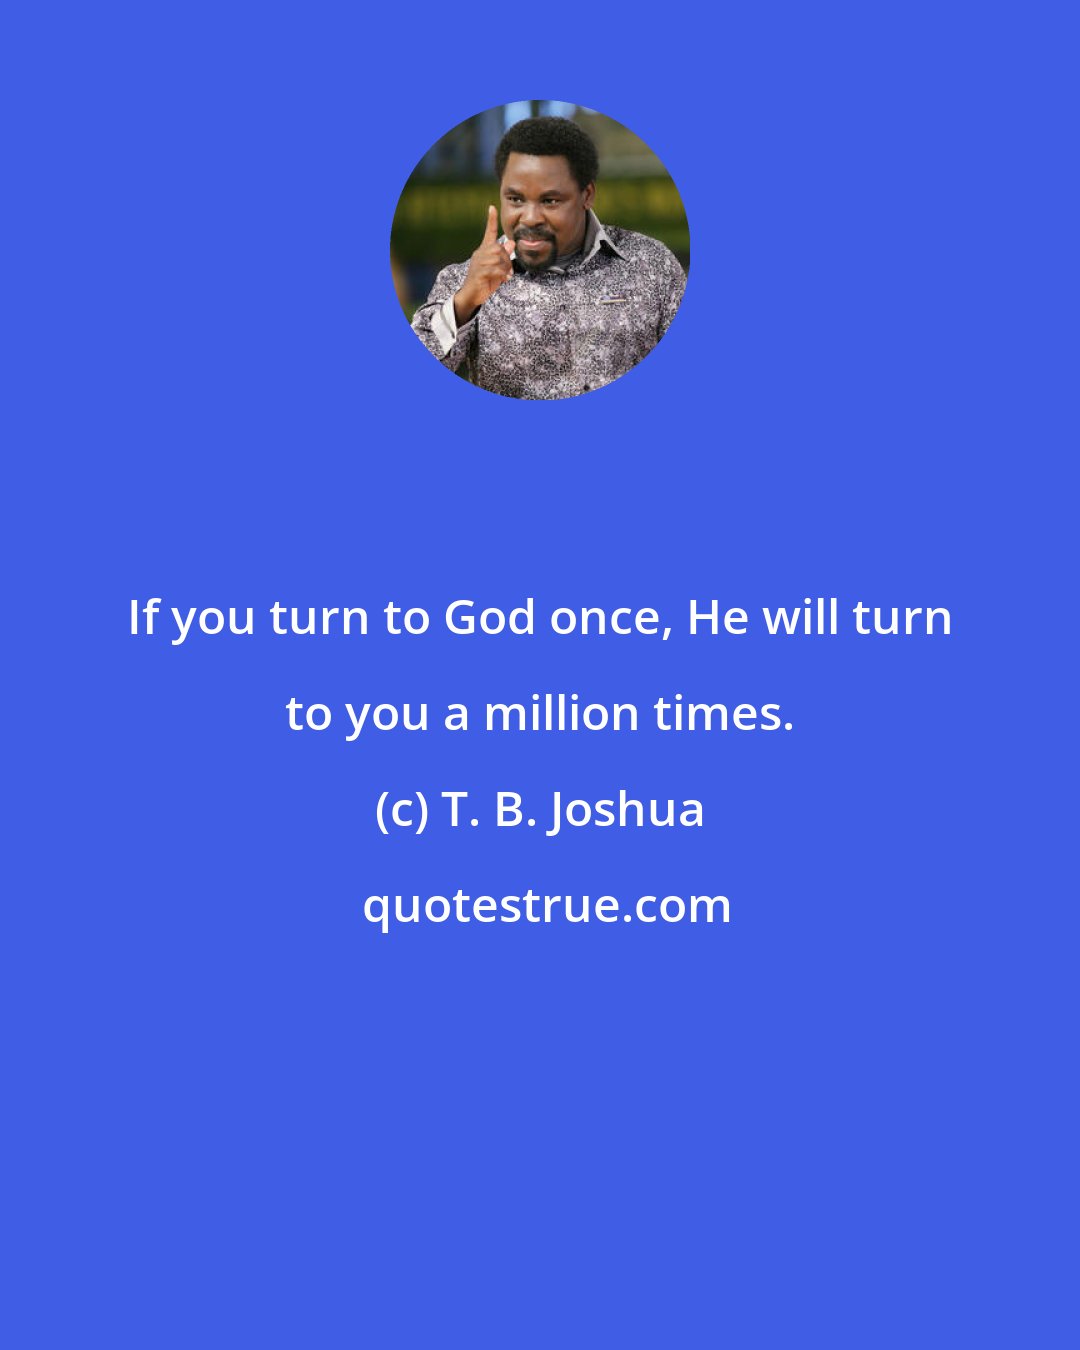 T. B. Joshua: If you turn to God once, He will turn to you a million times.